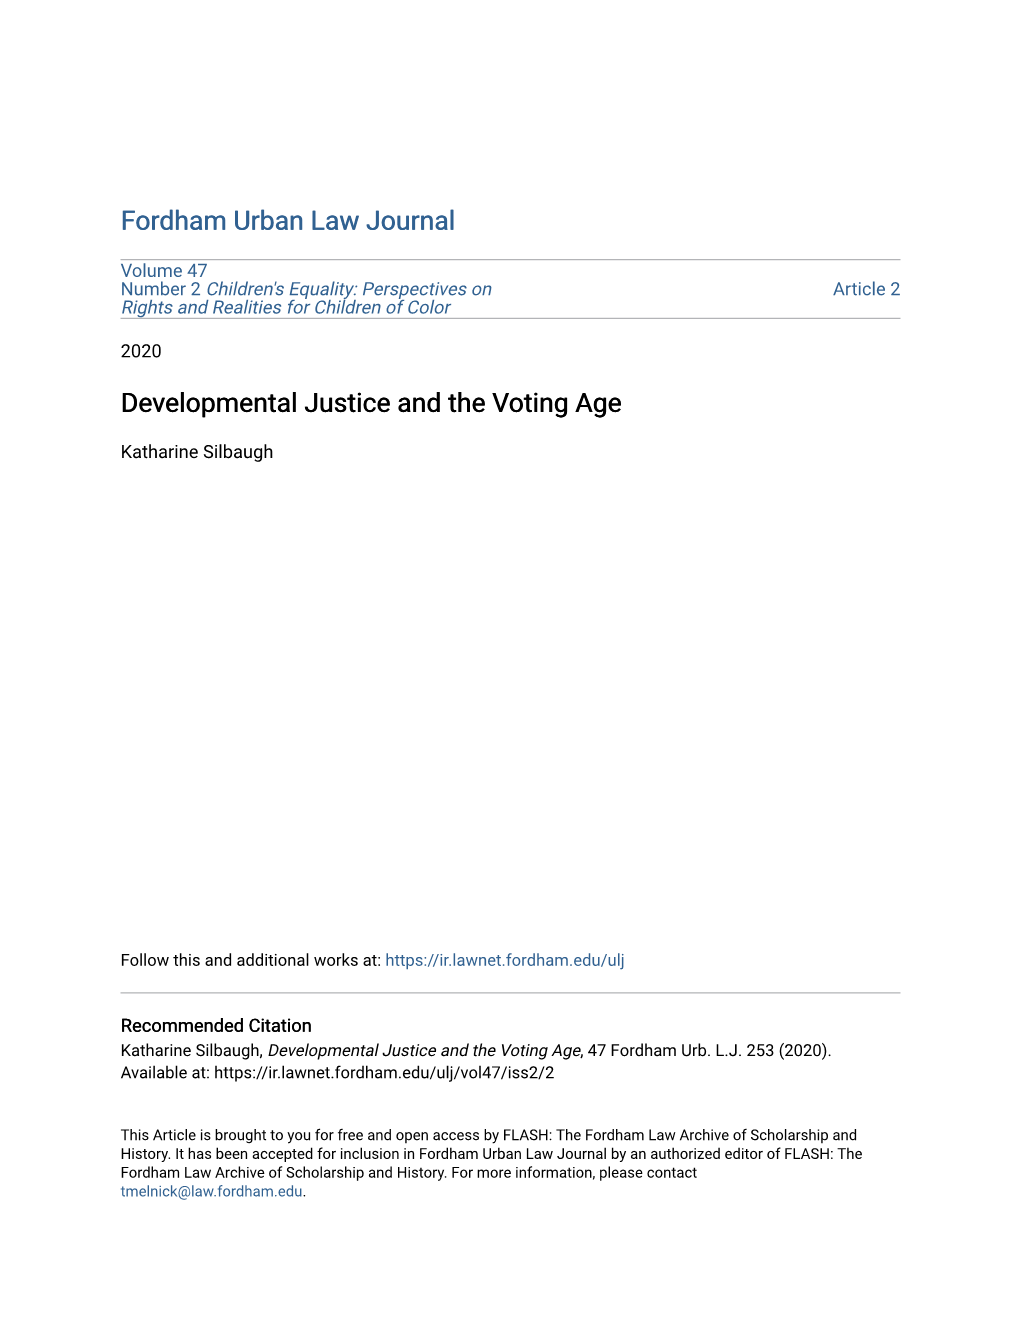 Developmental Justice and the Voting Age